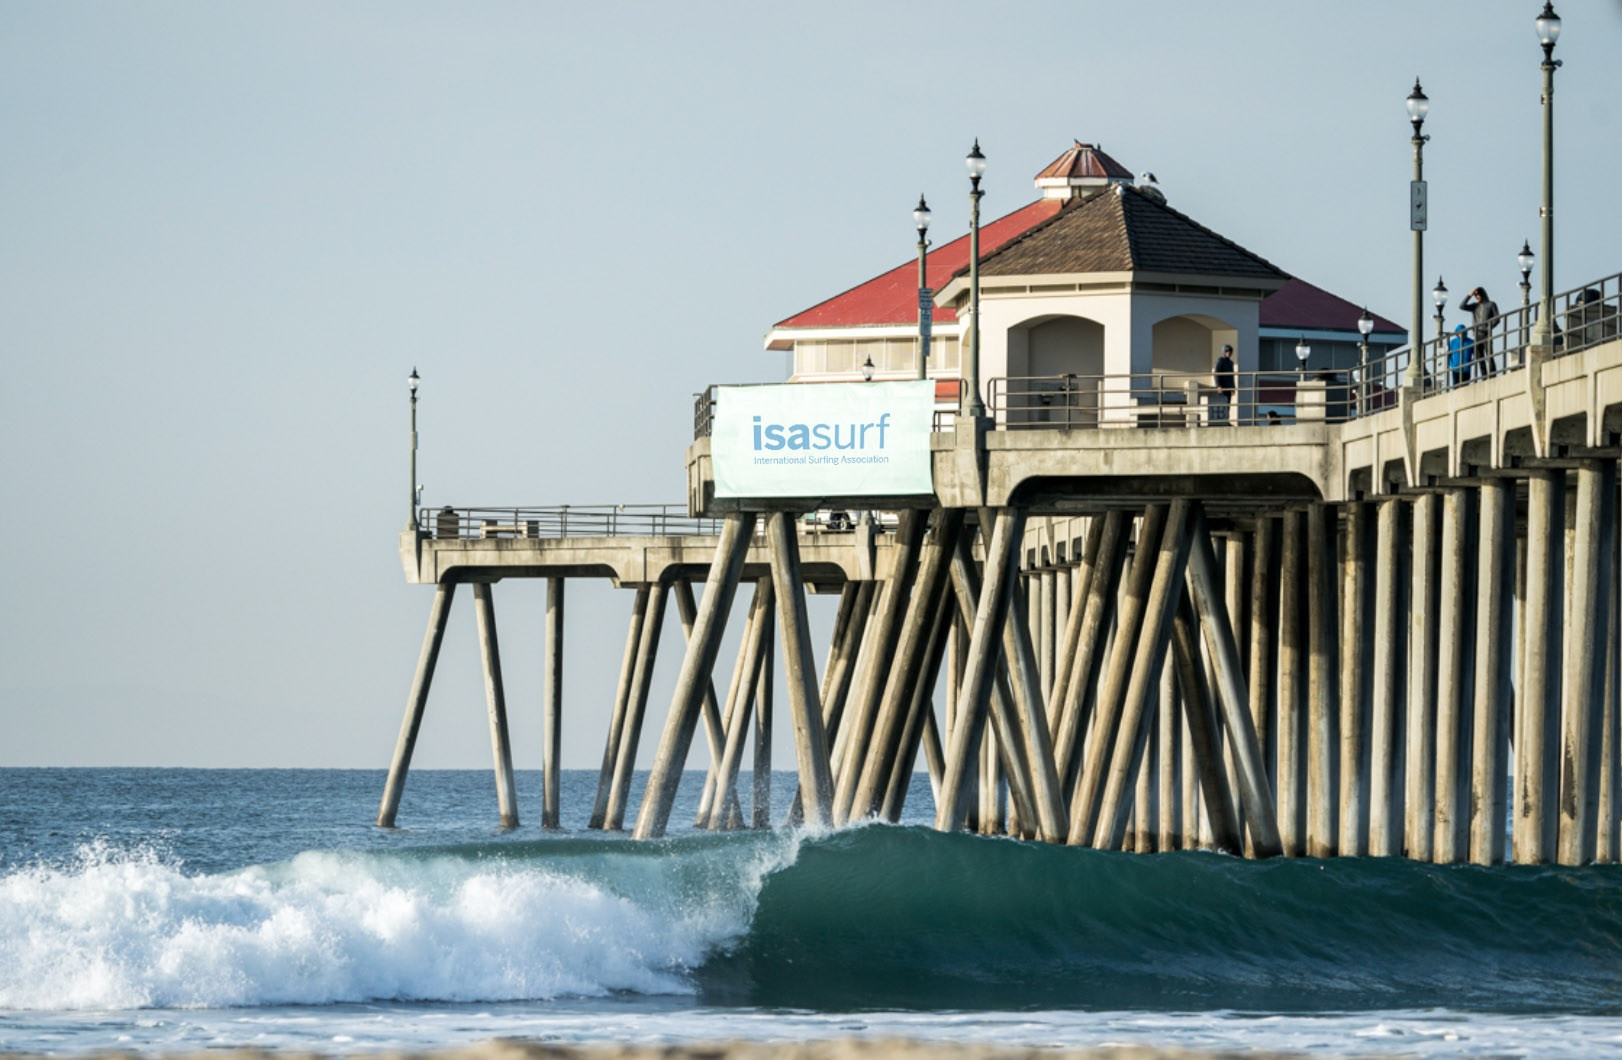 Huntington Beach to stage 2022 World Surfing Games